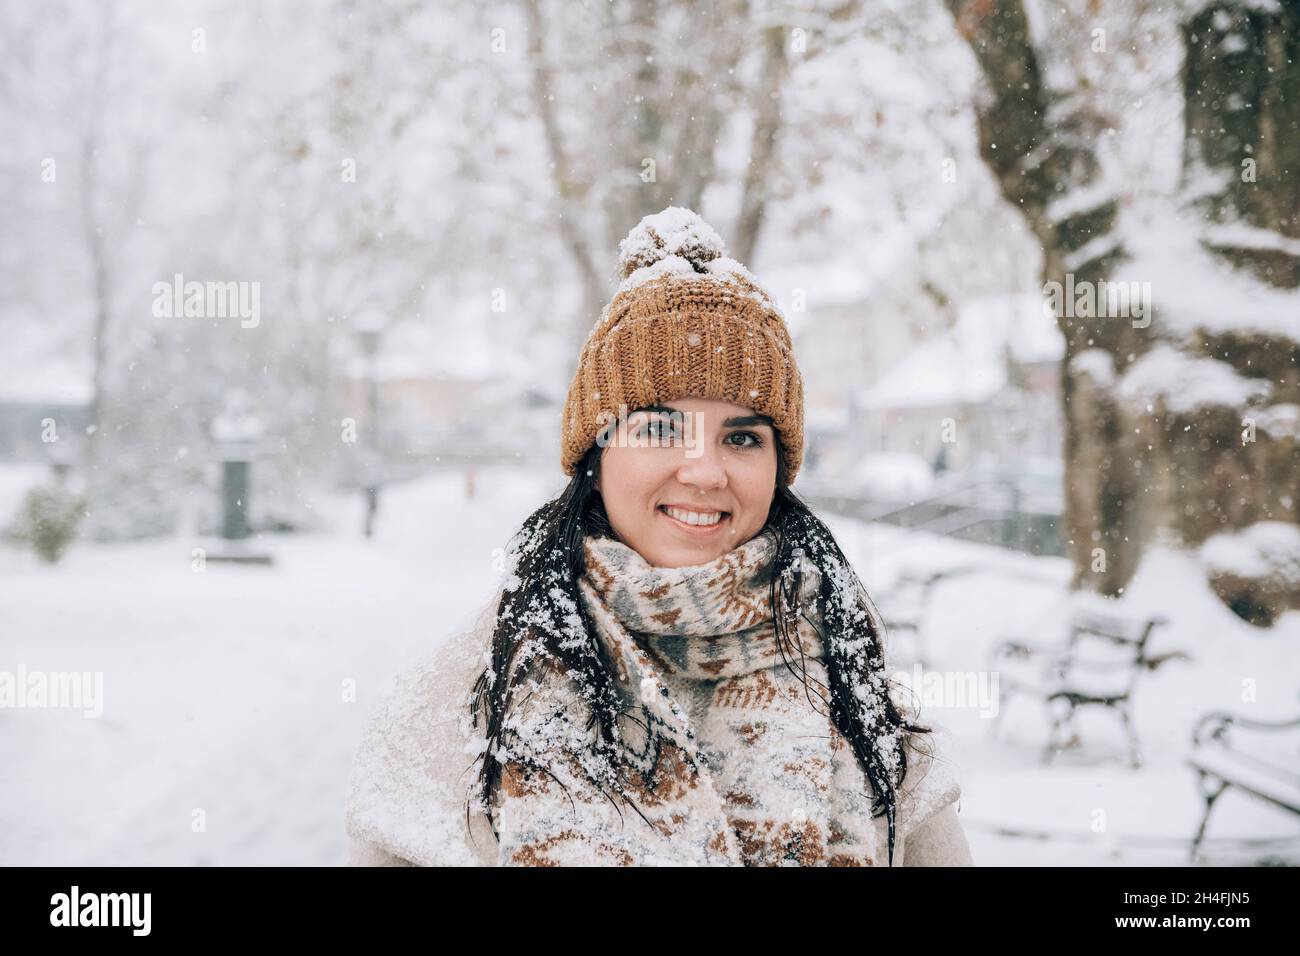 Premium Photo  Portrait of woman in winter clothes on the nature there is  a lot of snow around